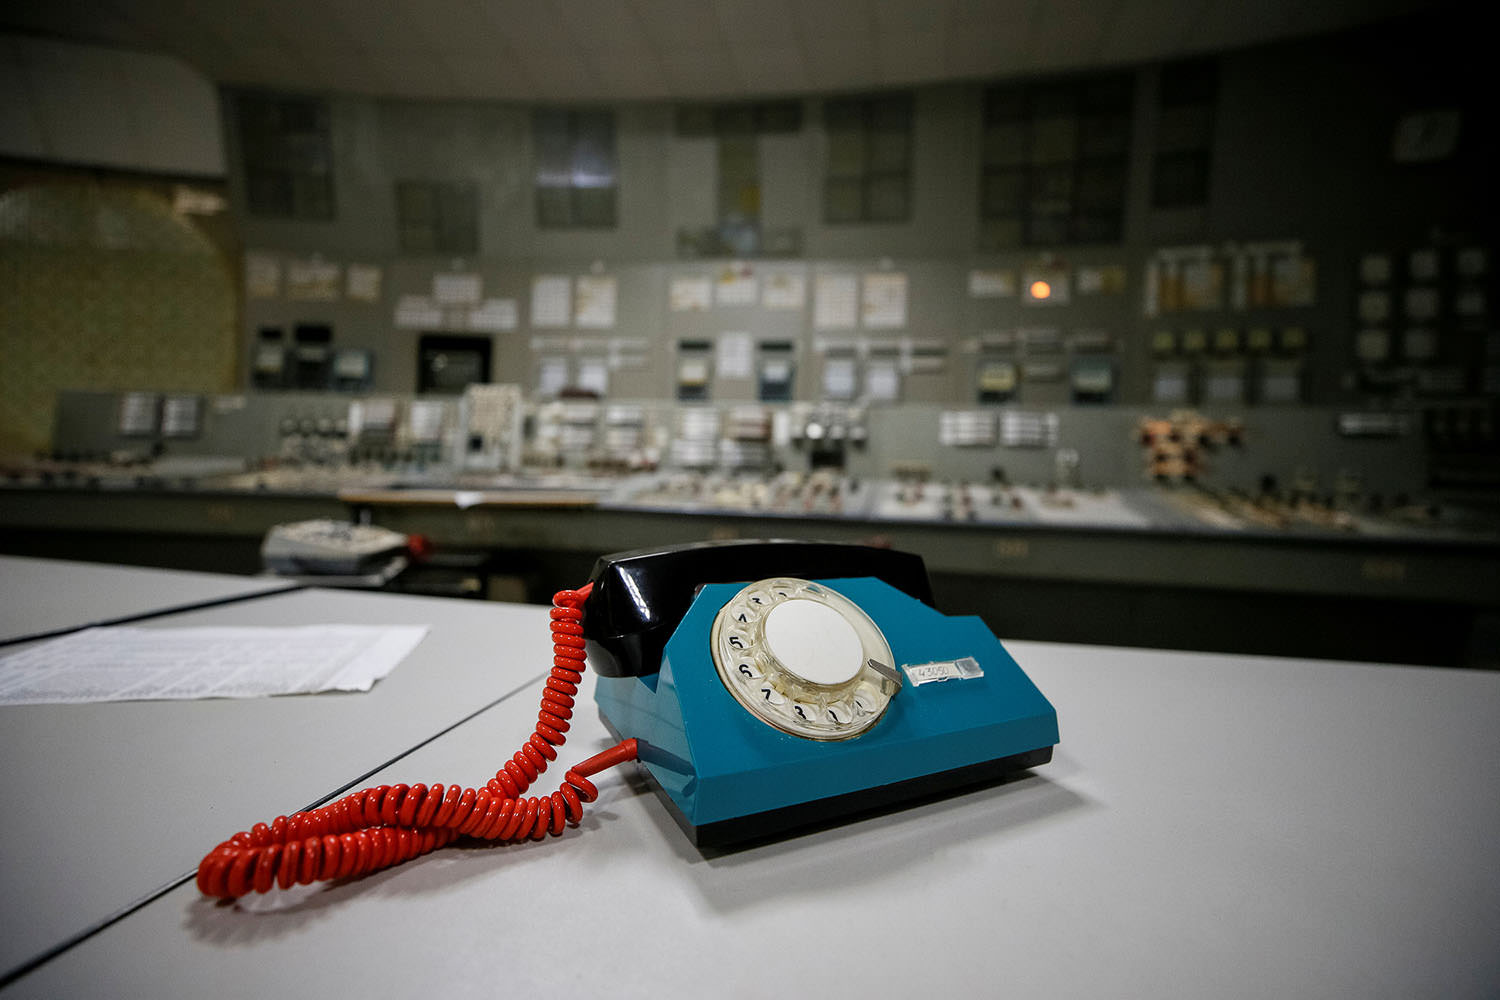 Chernobyl disaster blue phone in the control room